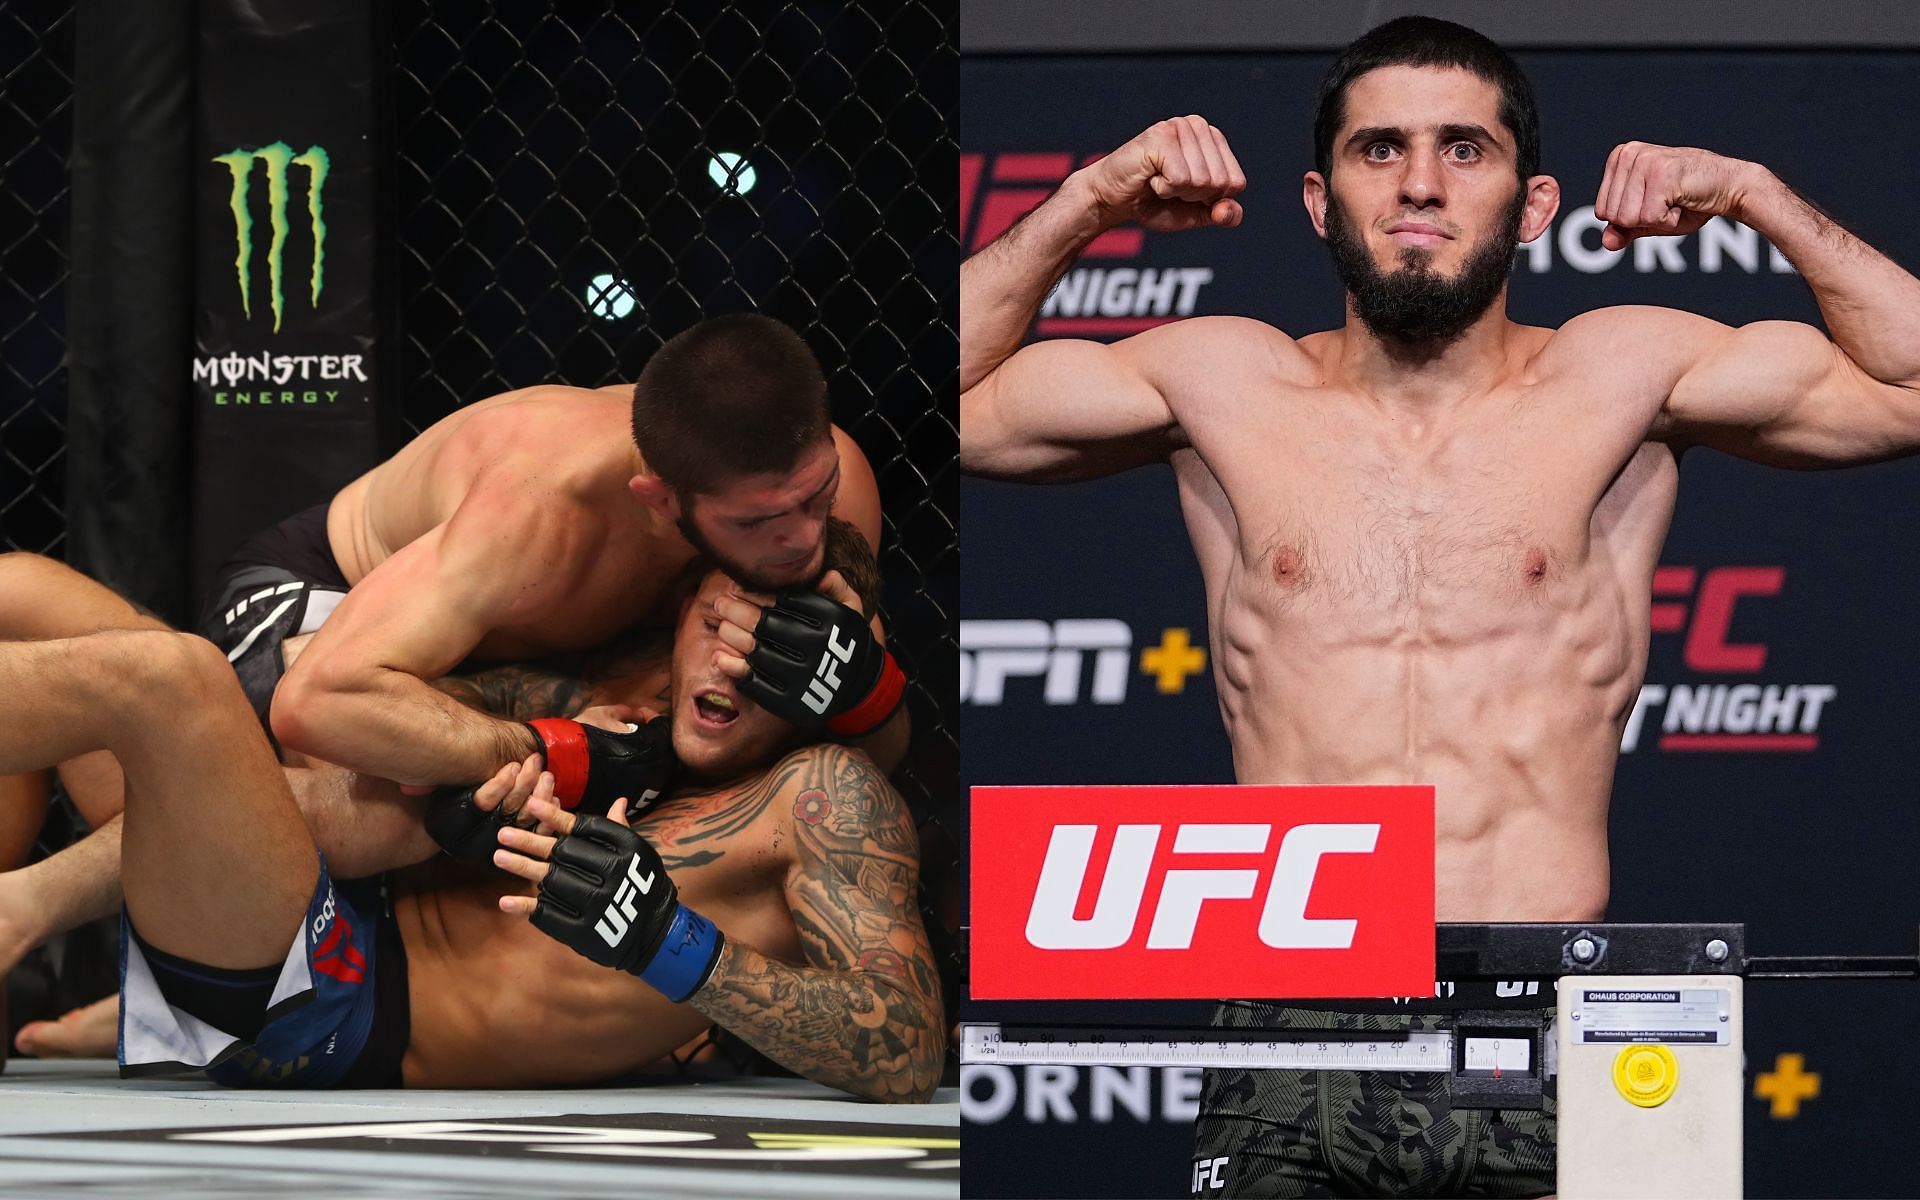 Islam Makhachev (right) has made an intriguing assertion concerning the Khabib Nurmagomedov vs. Dustin Poirier fight (left) [Images courtesy: Getty Images]